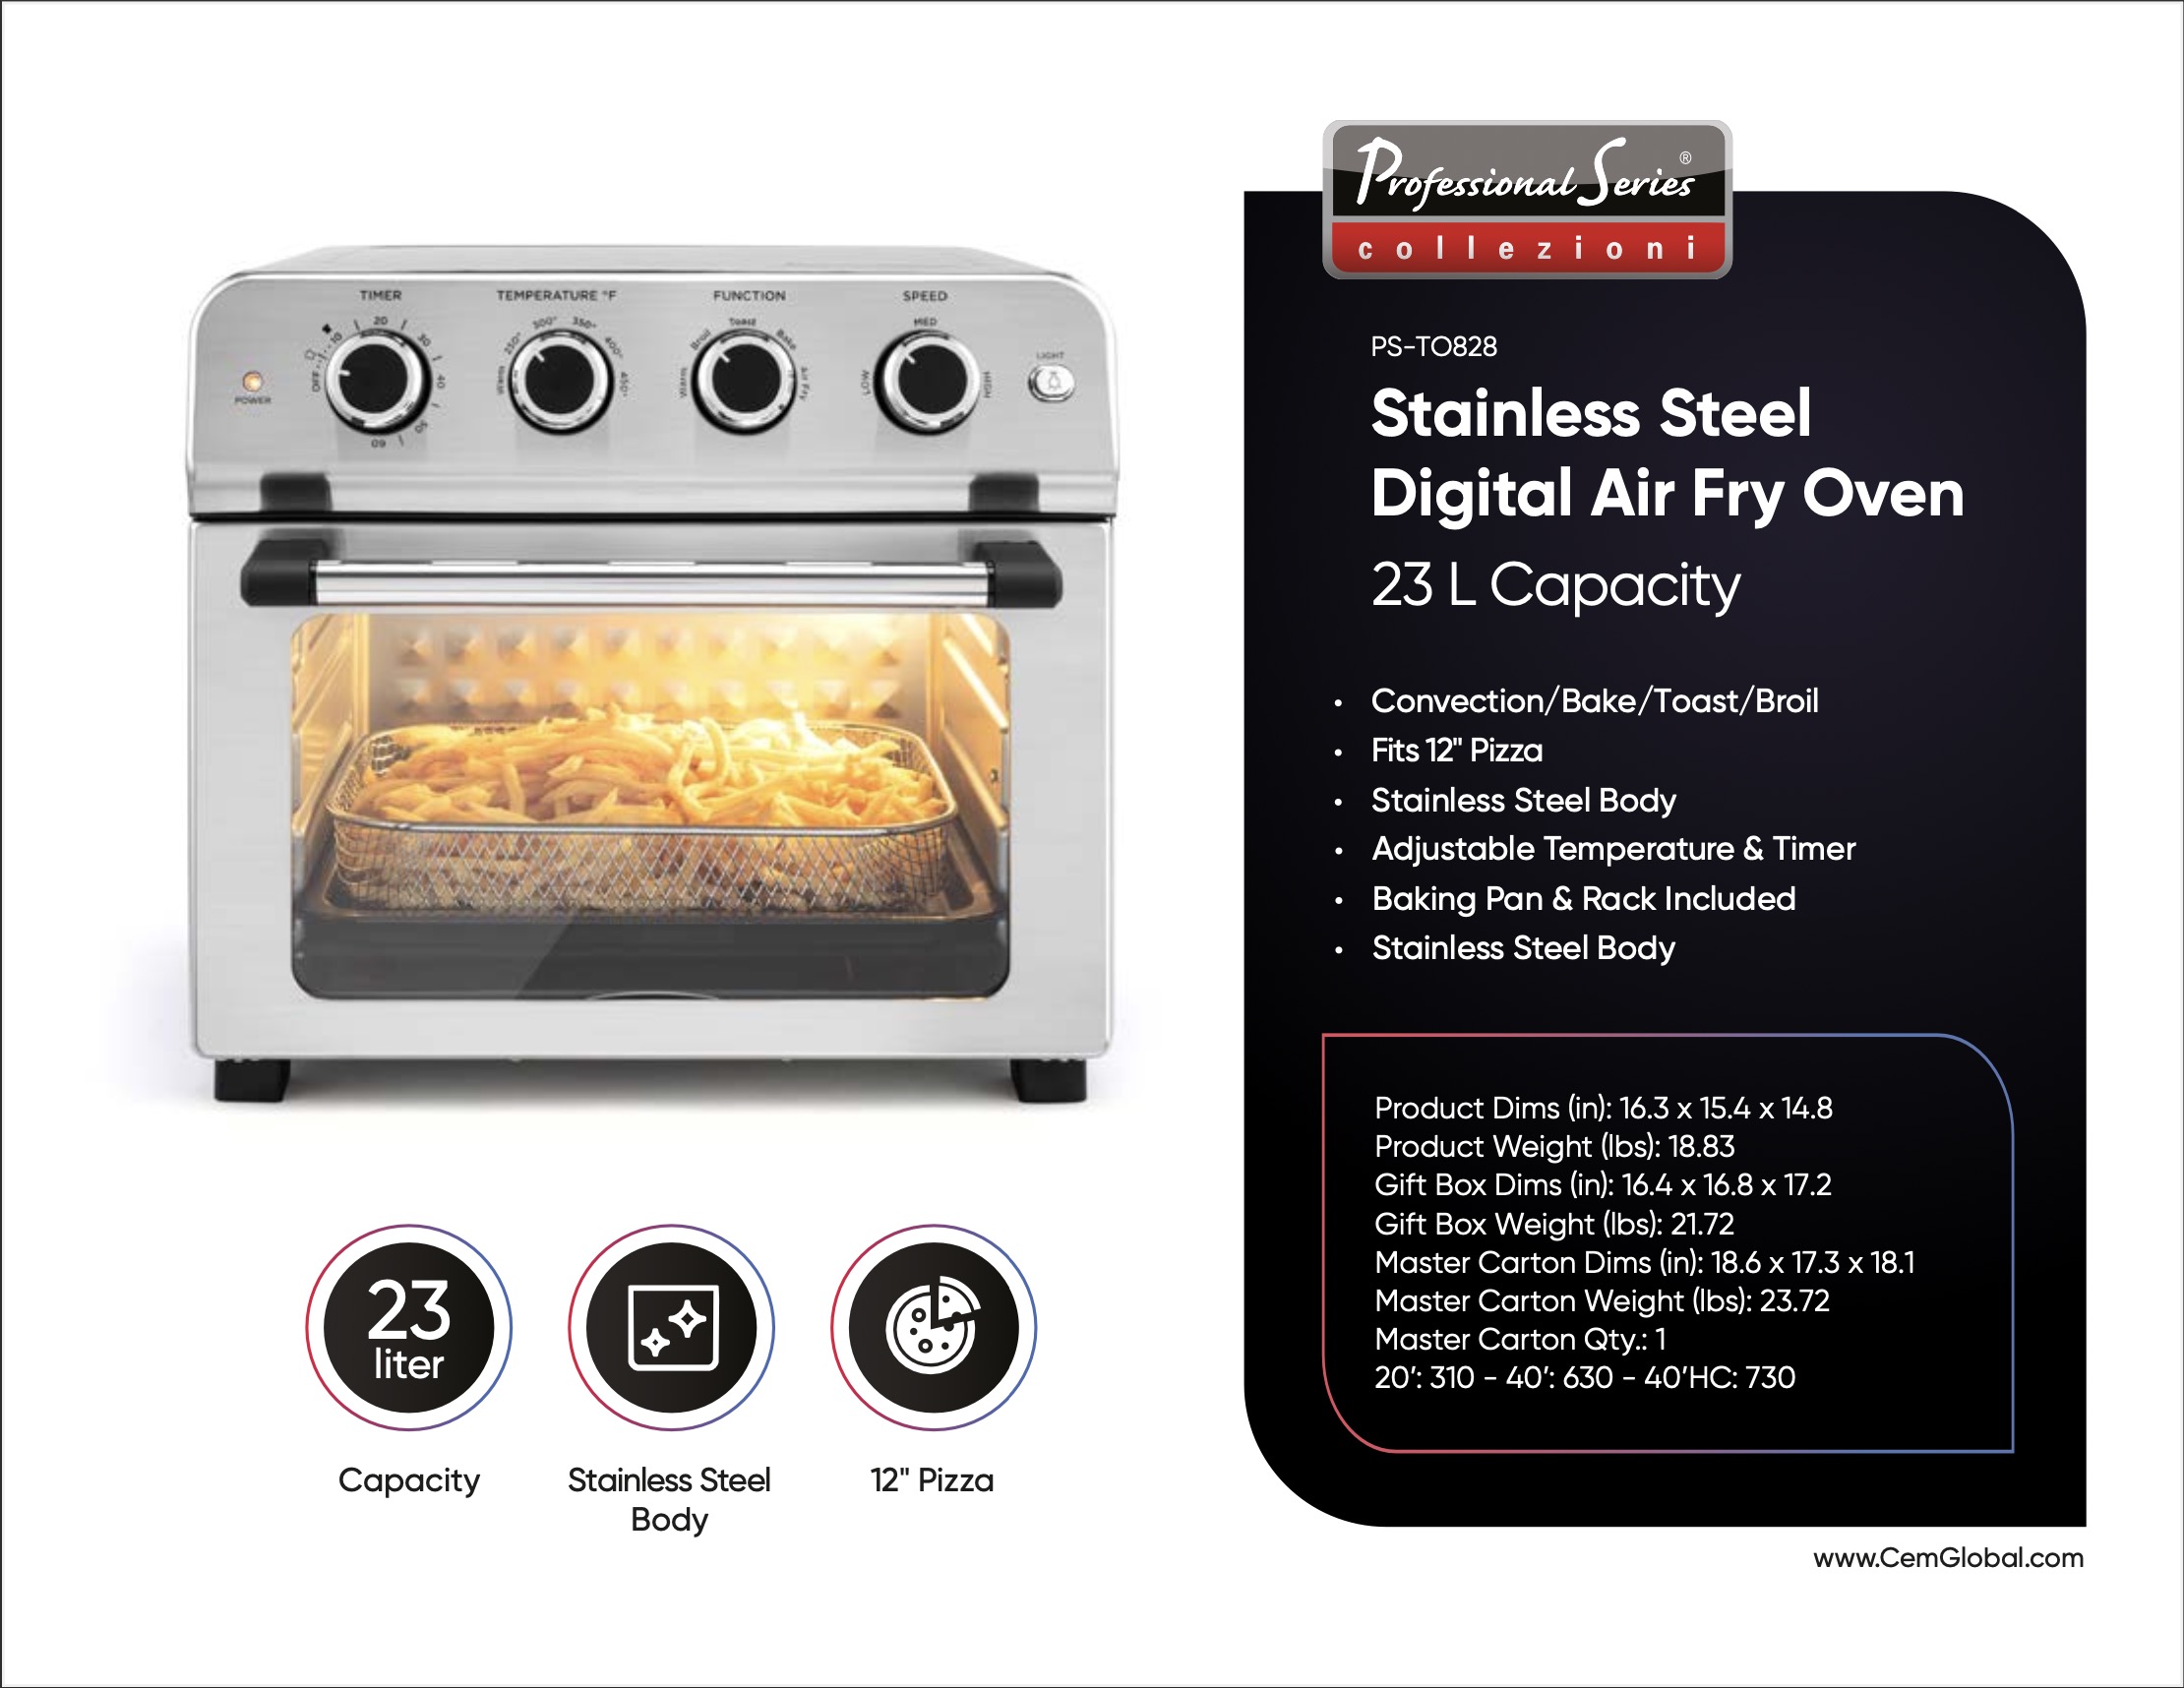 Stainless Steel Digital Air Fry Oven 23 L